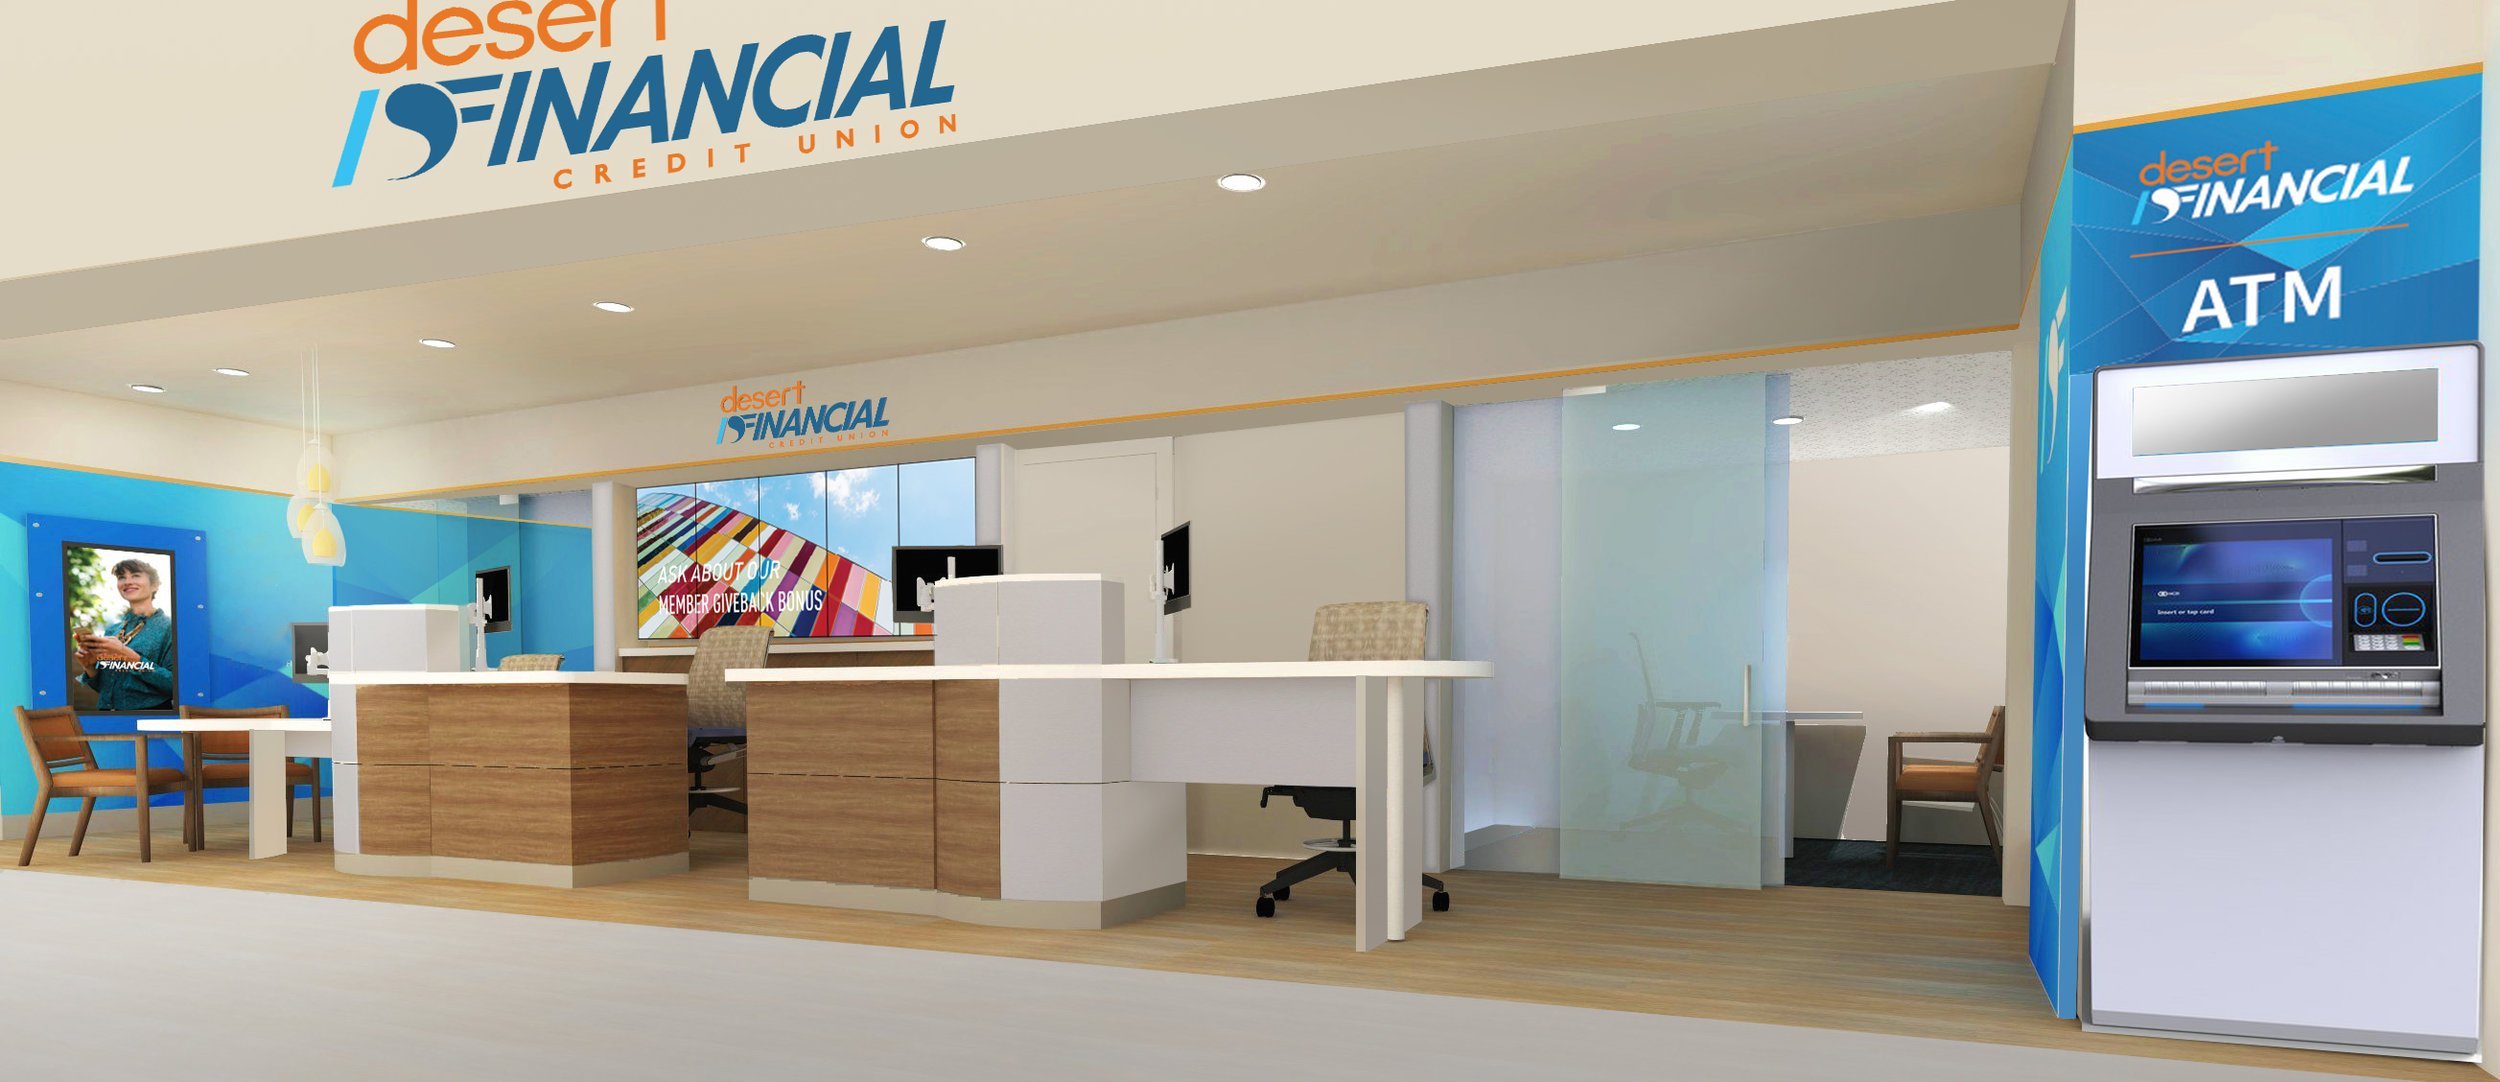 Desert Financial Credit Union Final Rendering by Lily Grace York